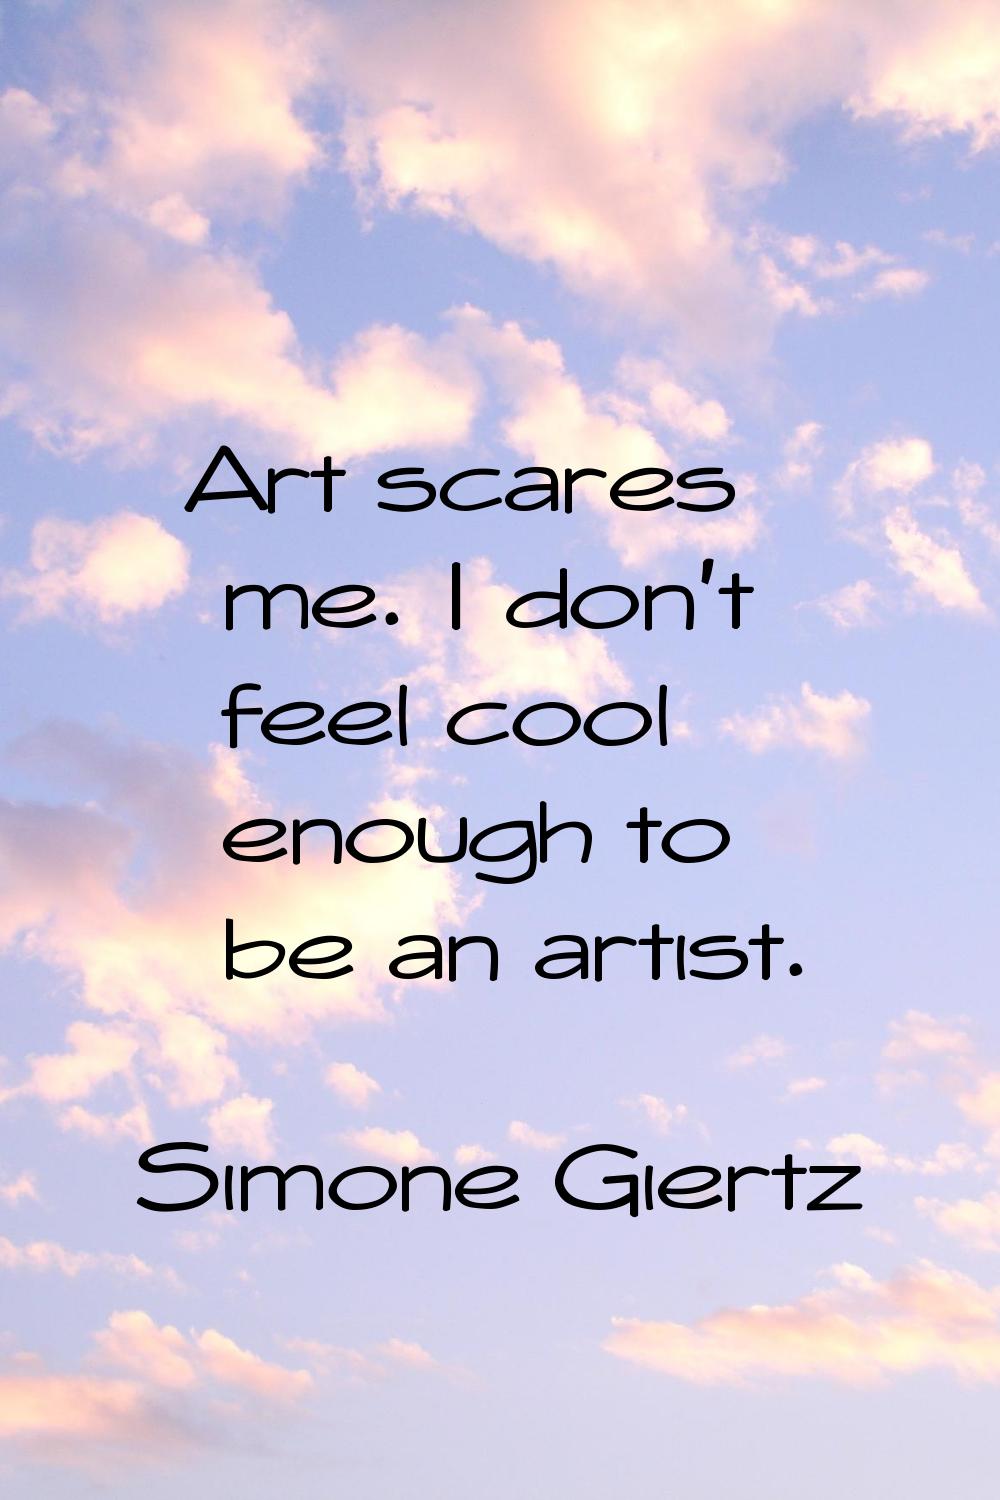 Art scares me. I don't feel cool enough to be an artist.